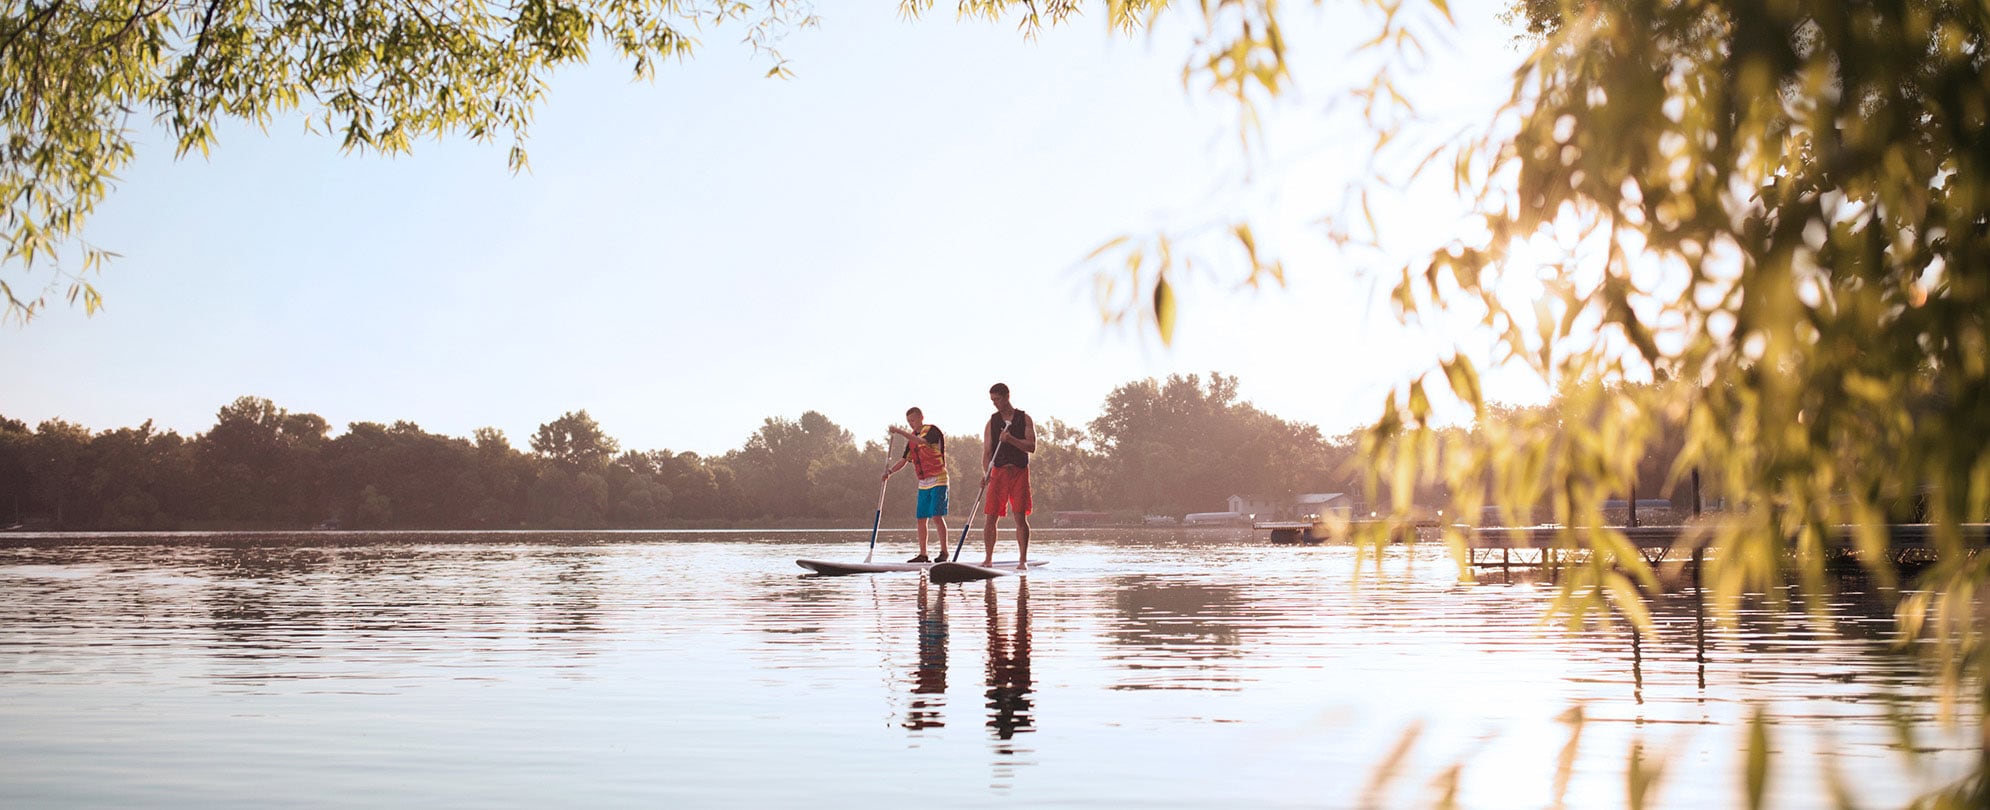 A father and son paddle board around a lake in the Midwest while on vacation